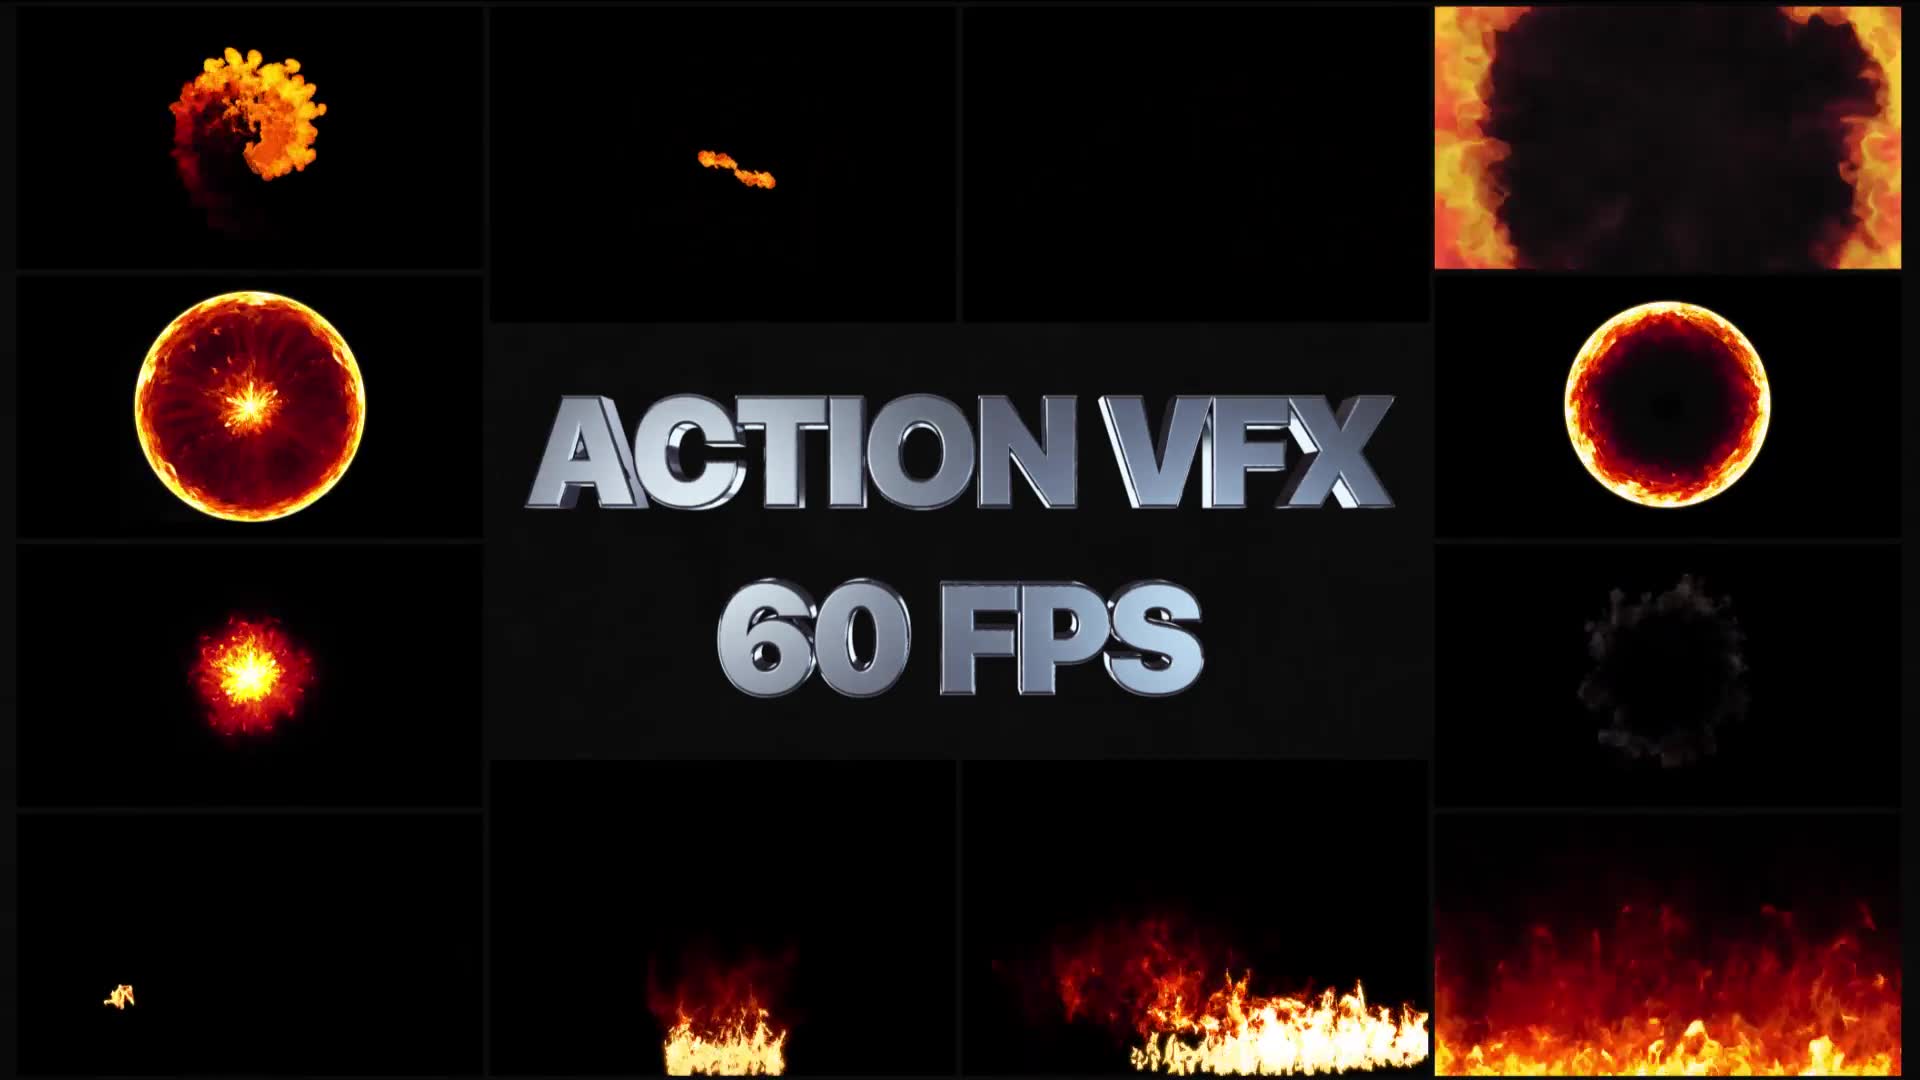 after effects fire plugin download